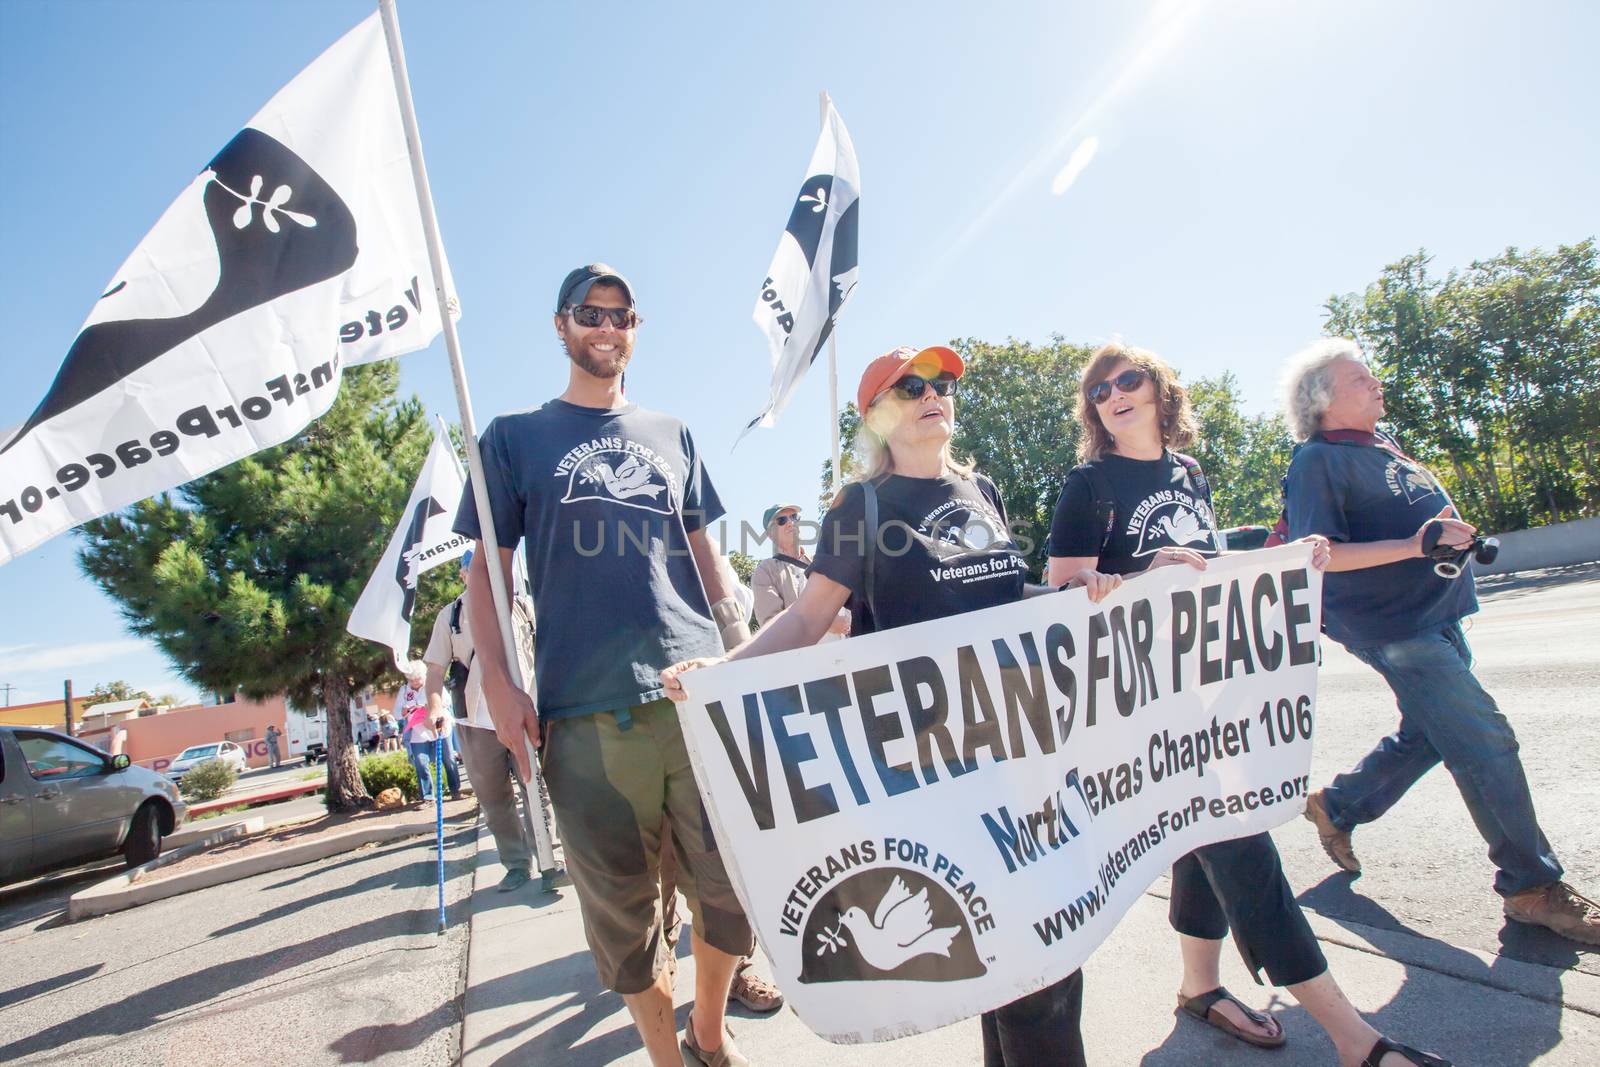 Veterans For Peace at Border Protest March by Creatista